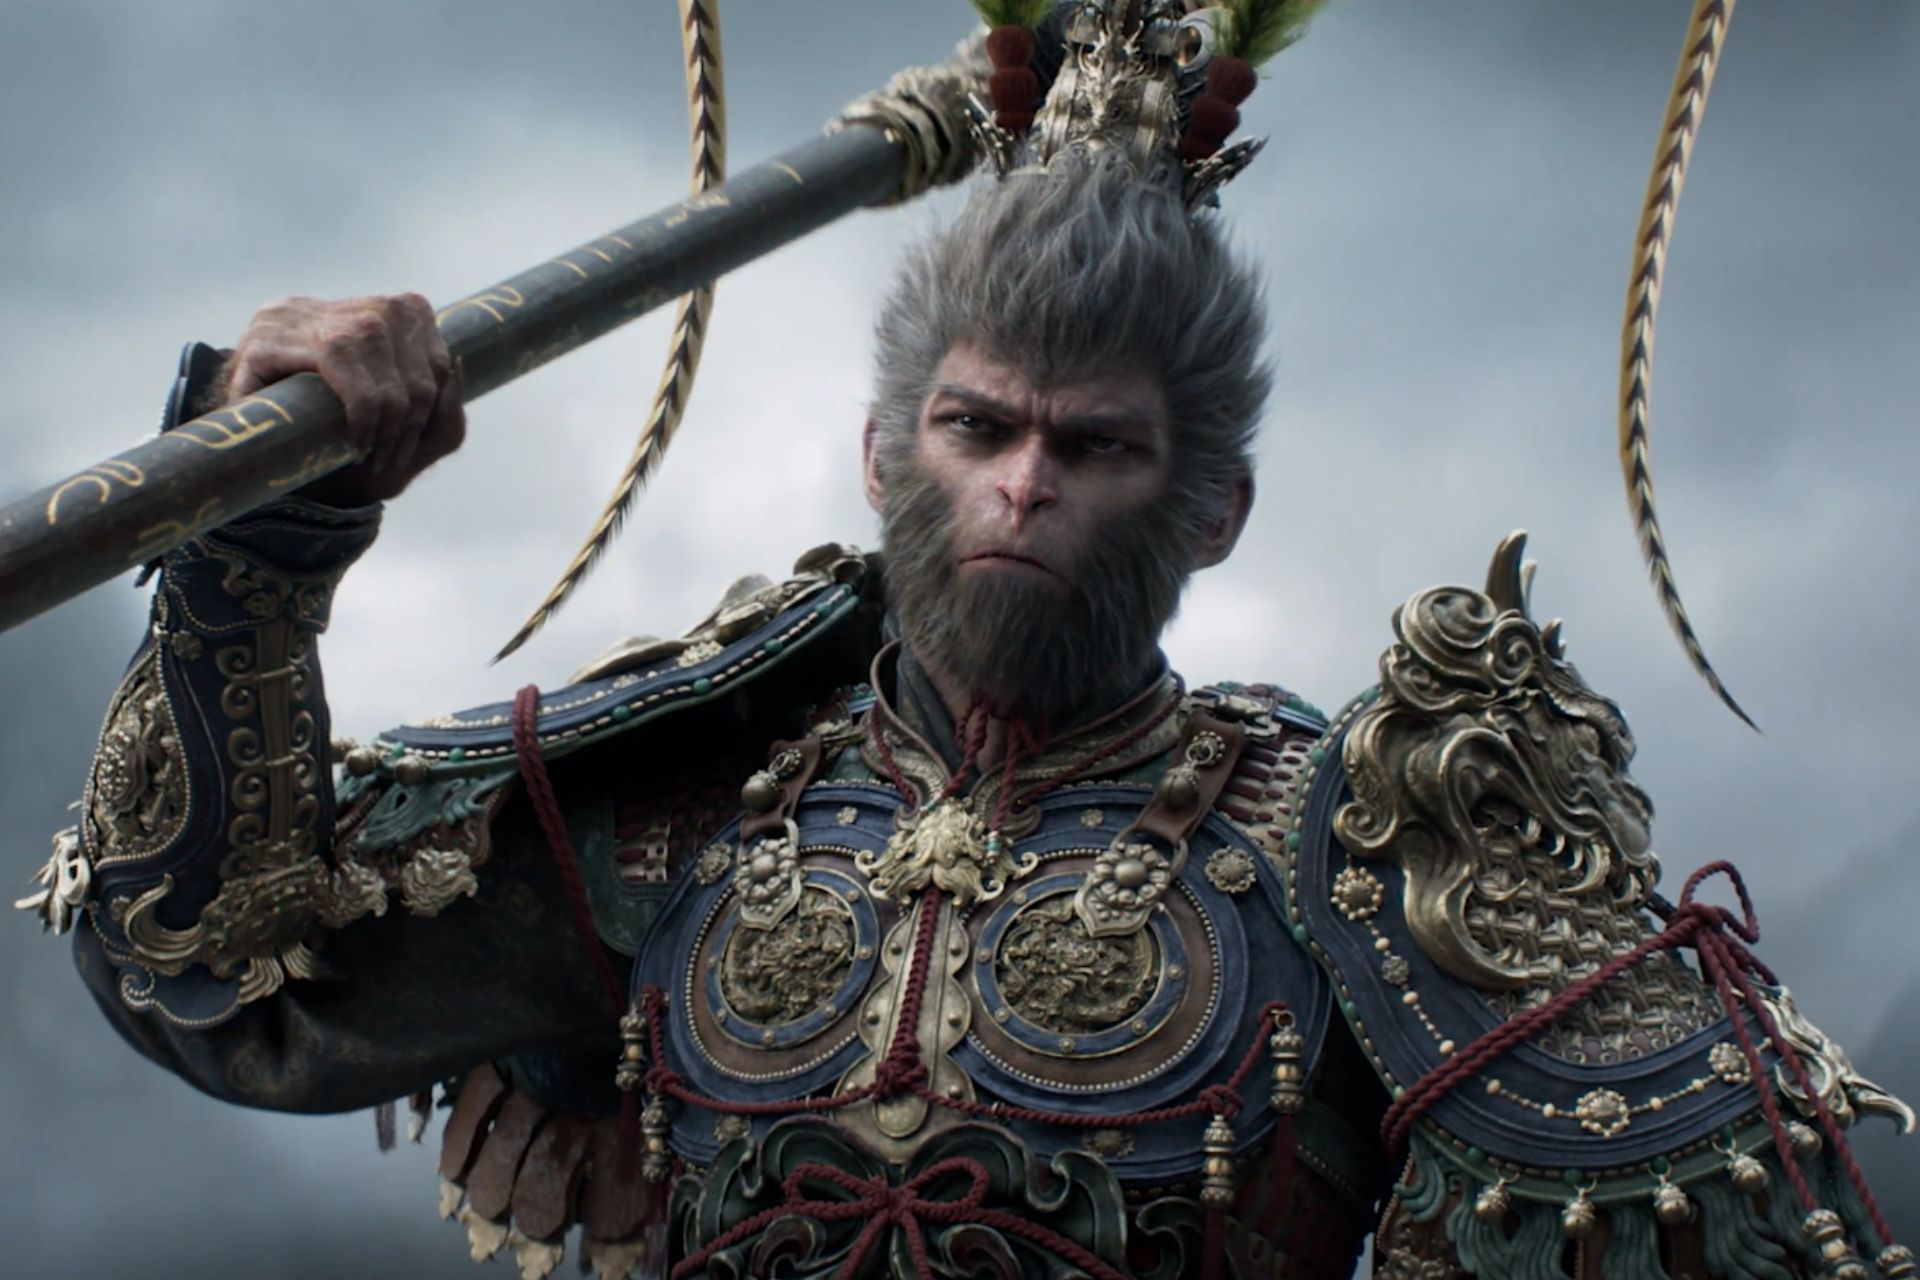 Microsoft and Game Science confirm Black Myth Wukong's release delay on Xbox Series XS